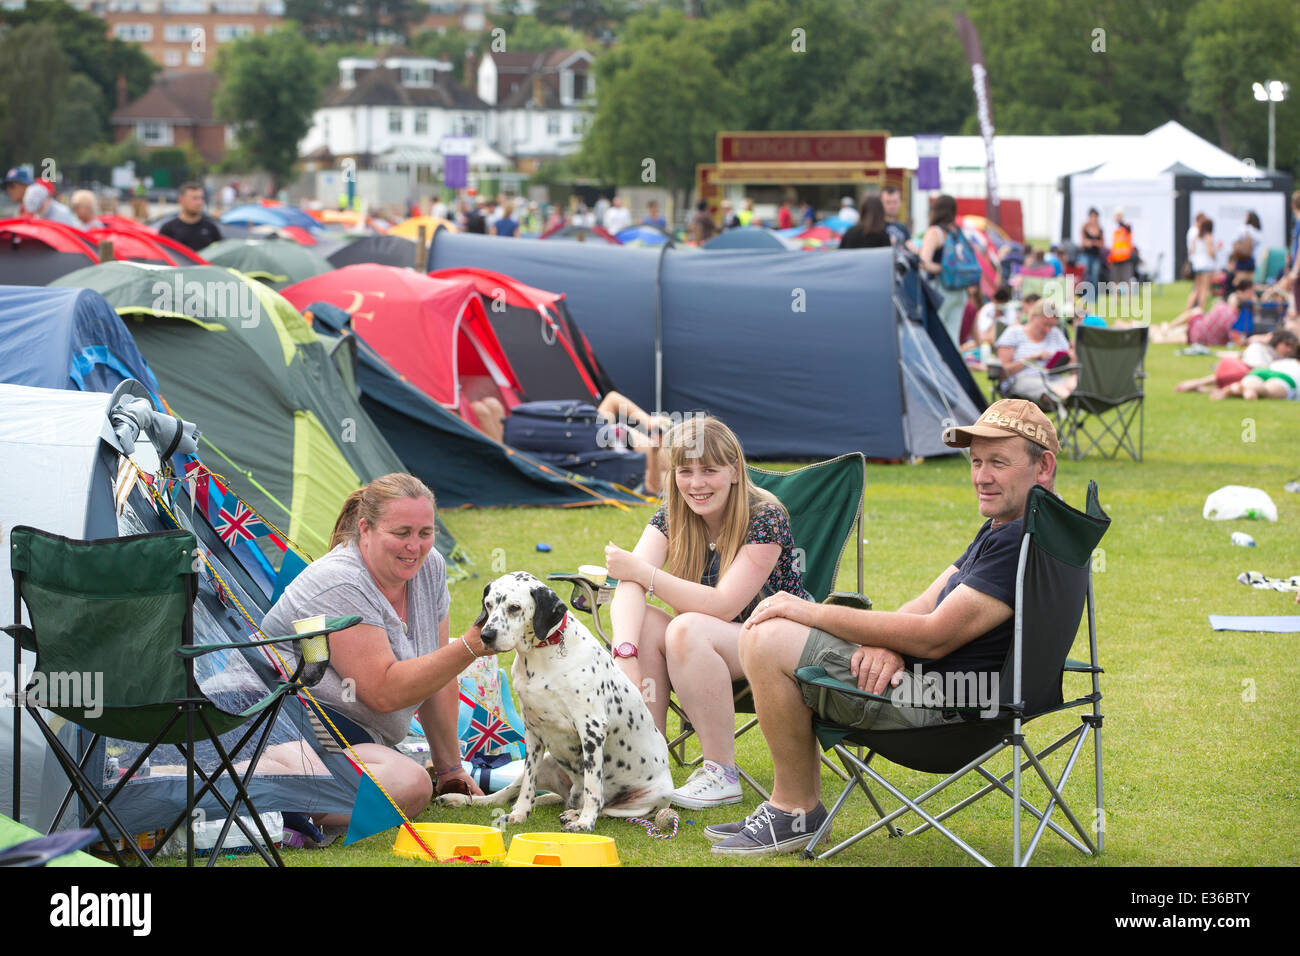 Wimbledon Park, London, UK. 22nd June, 2014. Tennis enthusiasts camp in Wimbledon Park overnight hoping to get a ticket for the opening match in Centre Court to see Andy Murray defend his title. Credit:  Clickpics/Alamy Live News Stock Photo